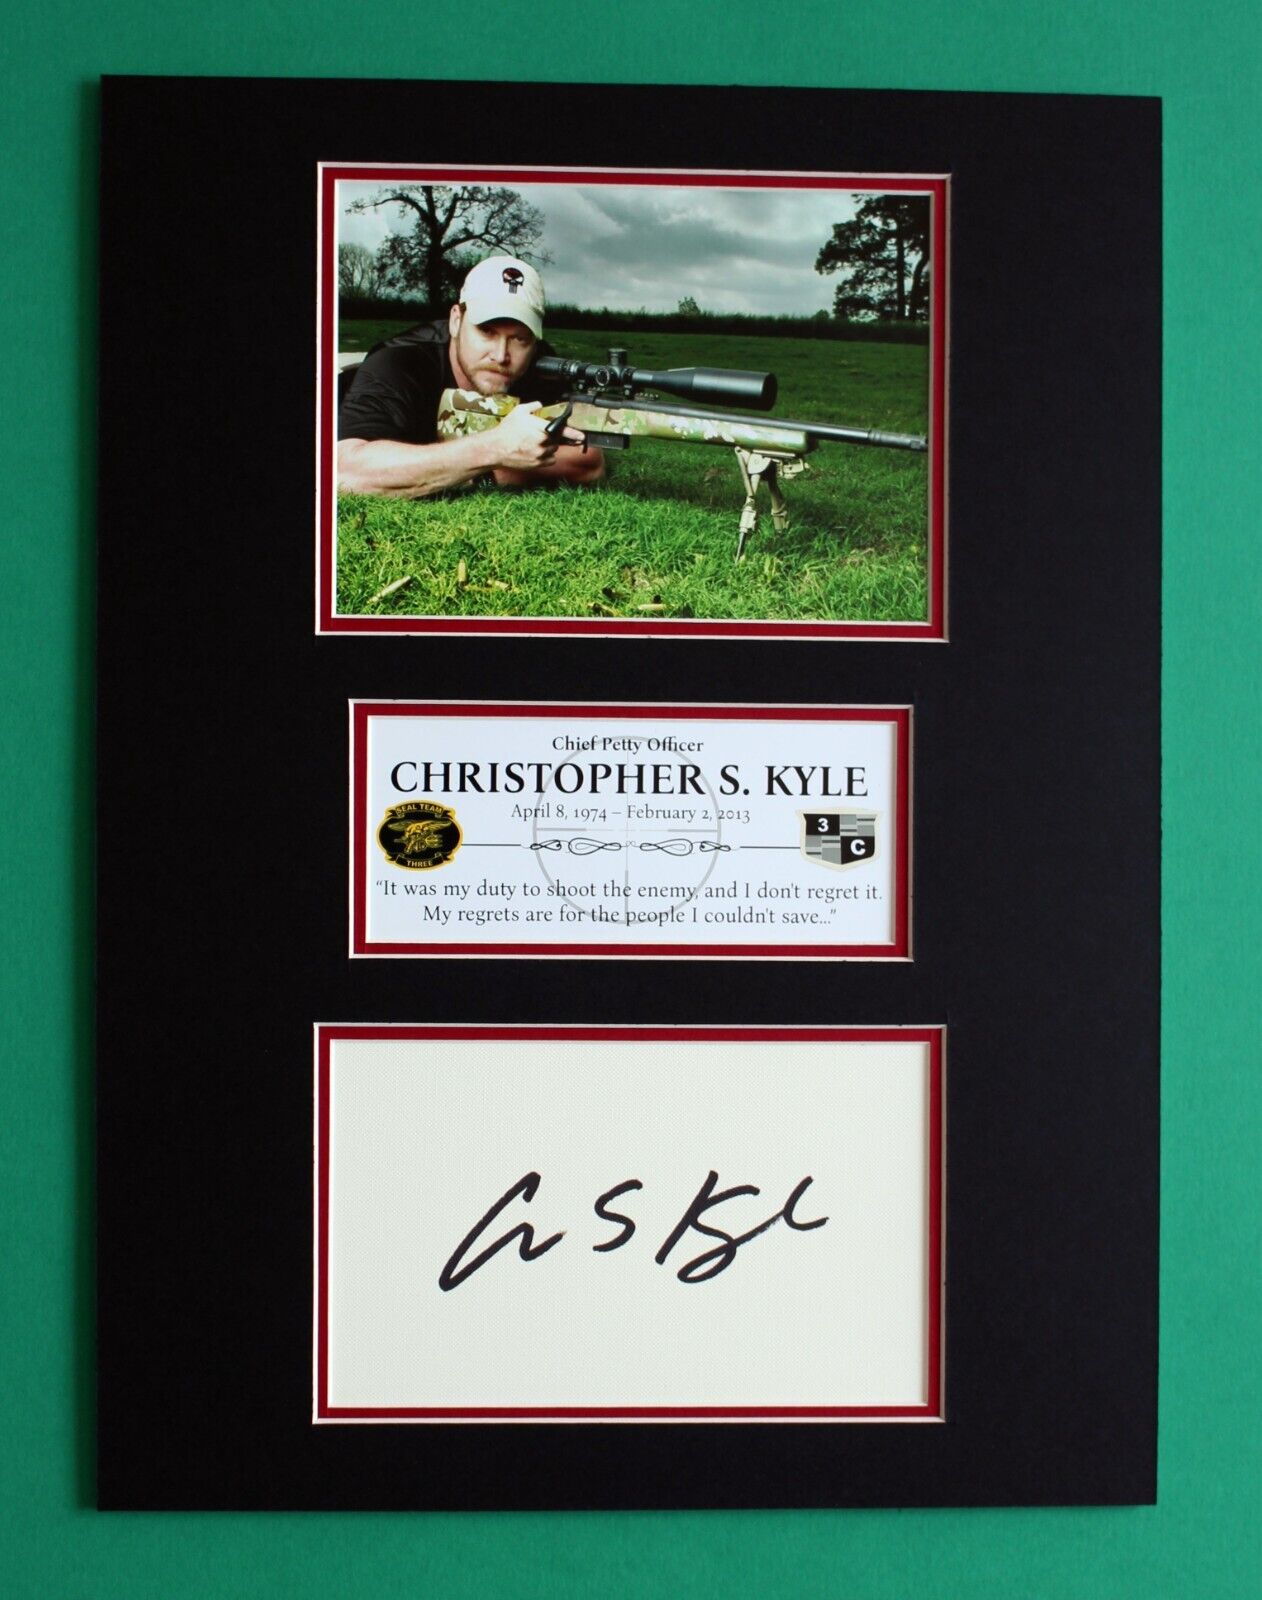 CHRIS KYLE AUTOGRAPH artistic display the Legend American Sniper